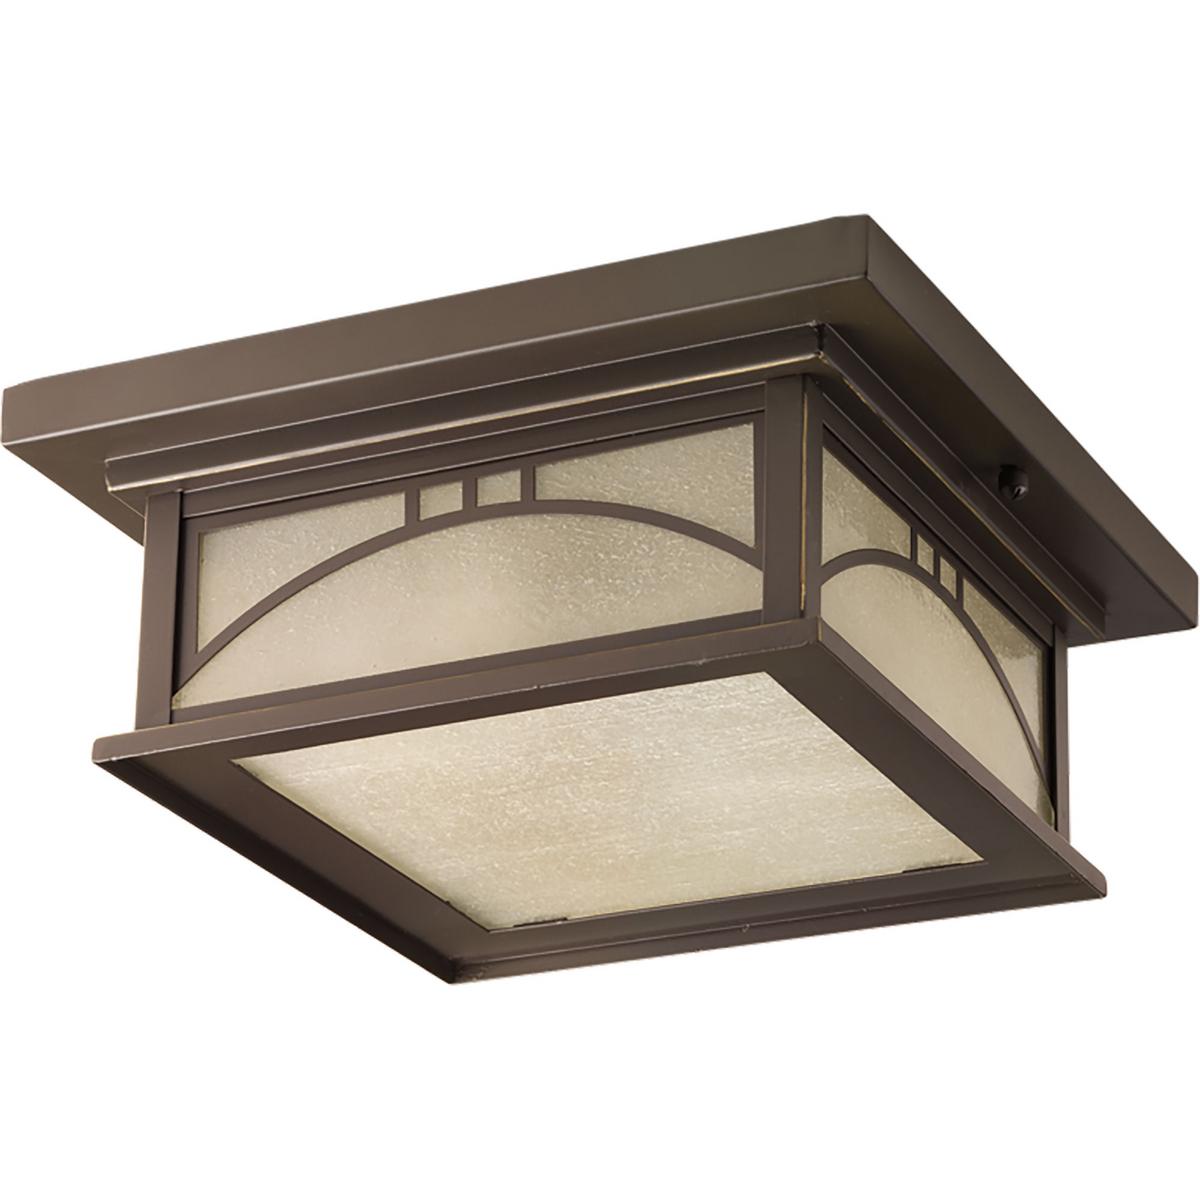 Hubbell P6055-20 Illuminate your home with this remarkable bronze finished wired lighting. Two-light close-to-ceiling with geometric details and textured art glass.  ; Antique bronze finish. ; Umber textured art glass panels. ; Geometric details.